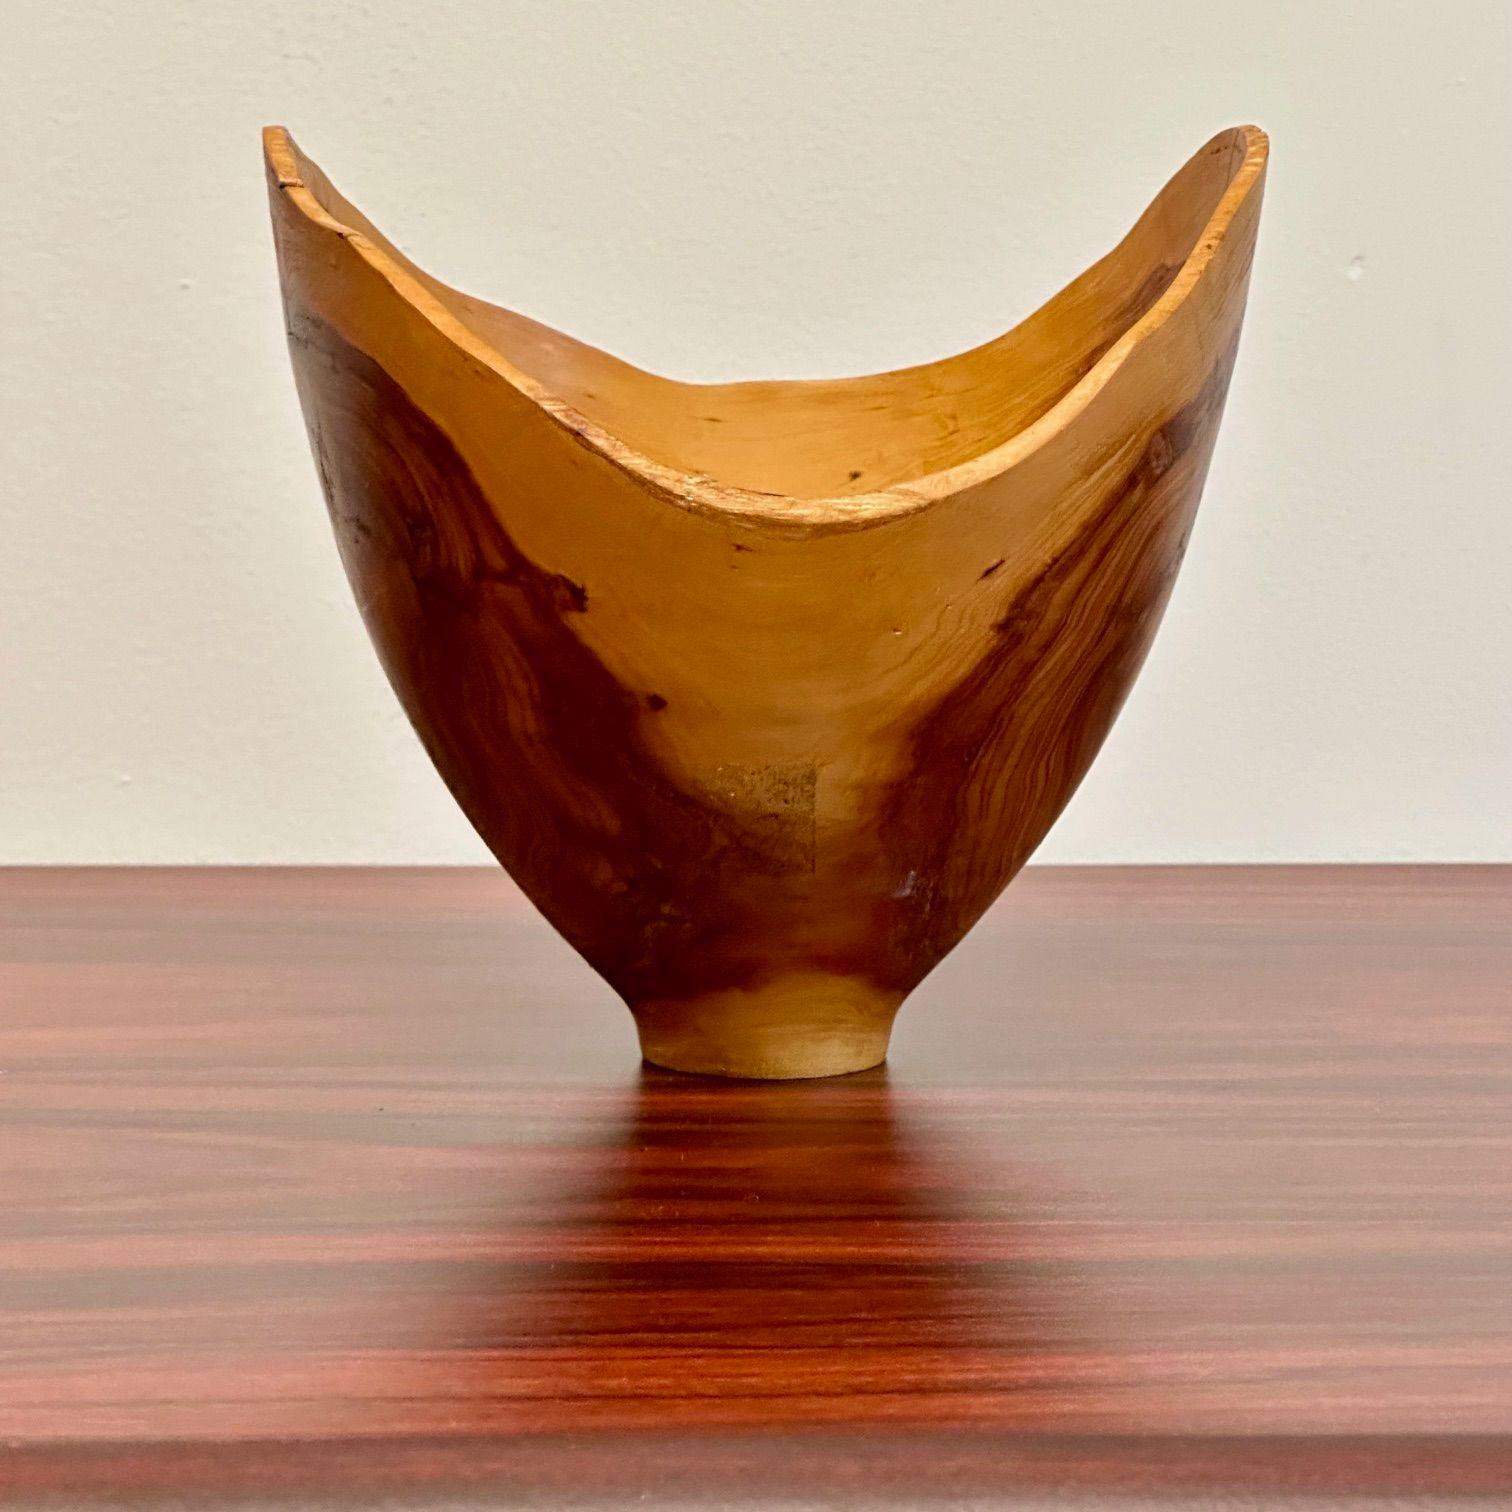 Mid-Century Modern Studio Made Bowl / Vessel, Tableware, White Cedar, Signed by J.L Dunne

Hand made organic form tall vessel, vase, or bowl in a unique white cedar wood. Signed and dated on the bottom, 'J.L Dunne 05-75'

White Cedar
United States,